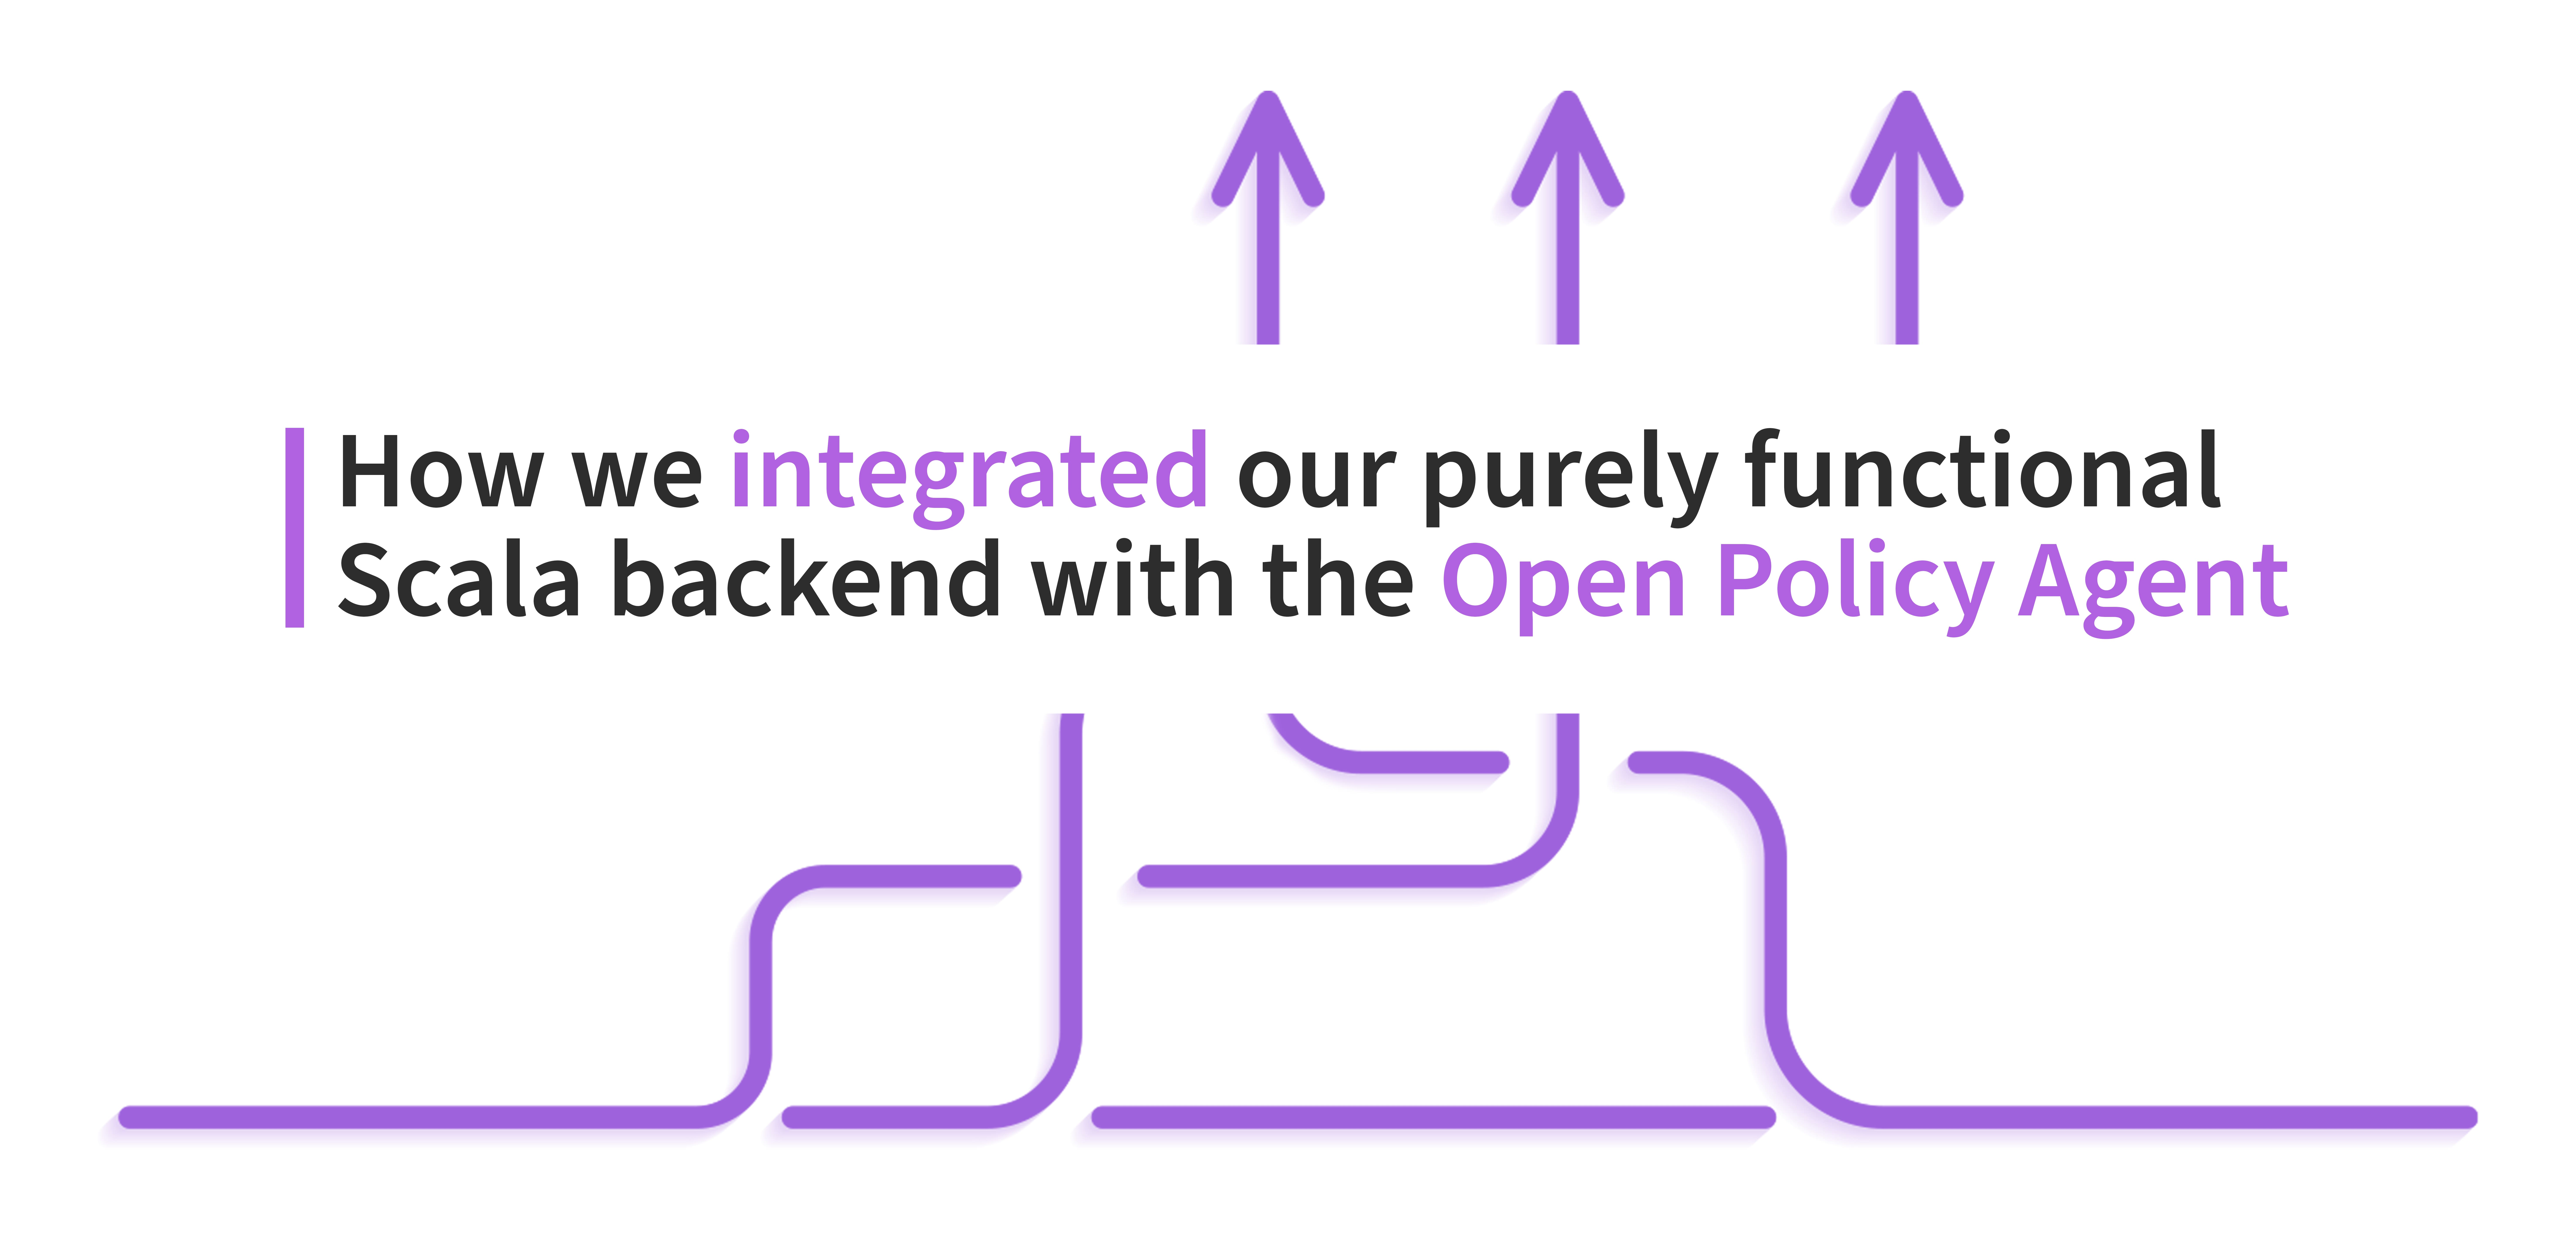 How we integrated our purely functional Scala backend with the Open Policy Agent